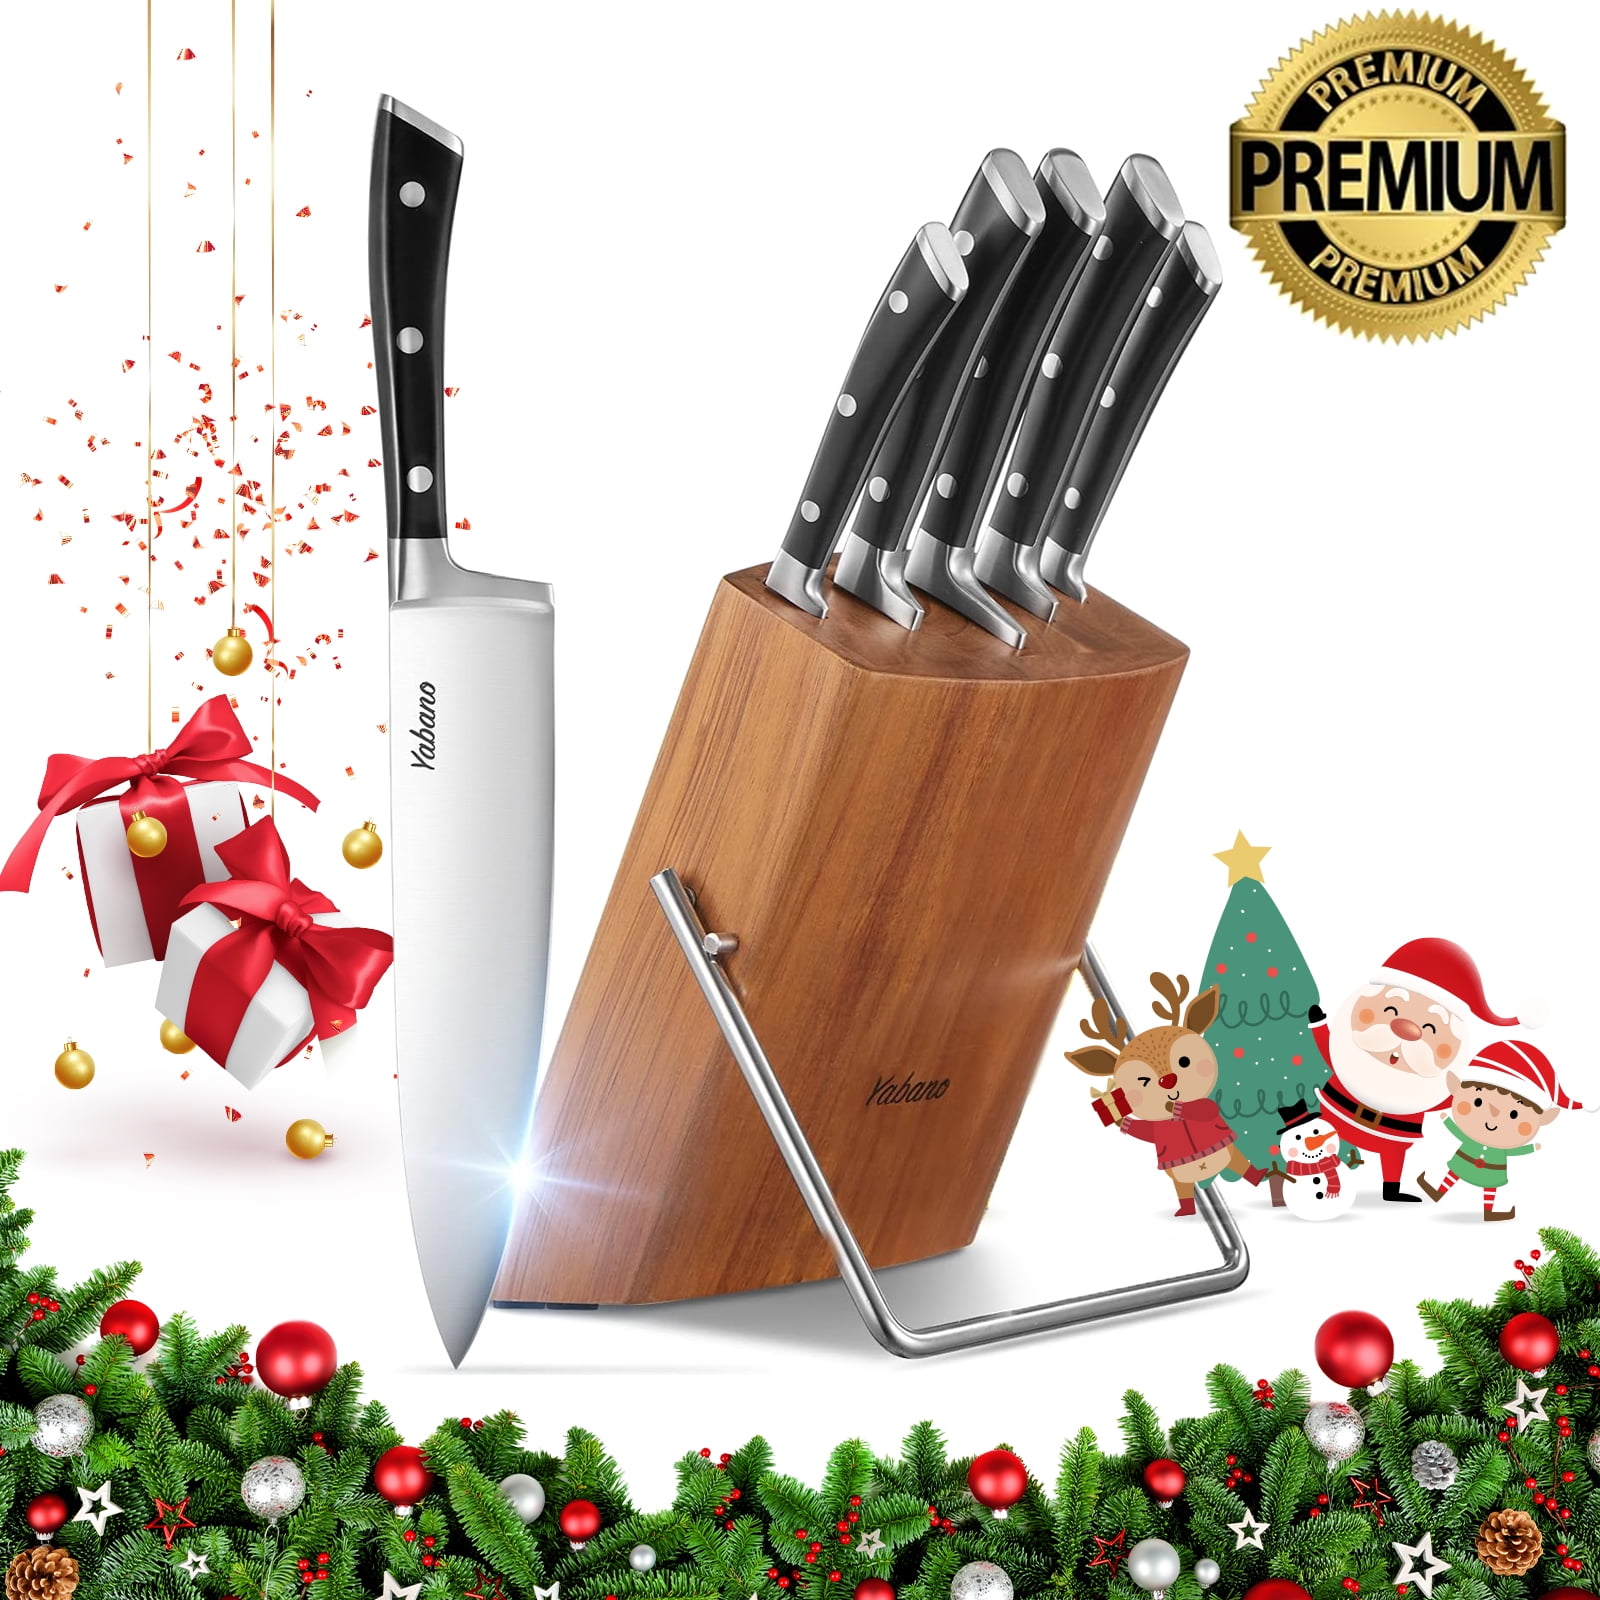 VAVSEA Knife Block Set, 16 Pieces Kitchen Knife Set with Block, Stainless  Steel Knife Set for Best Gift, Home